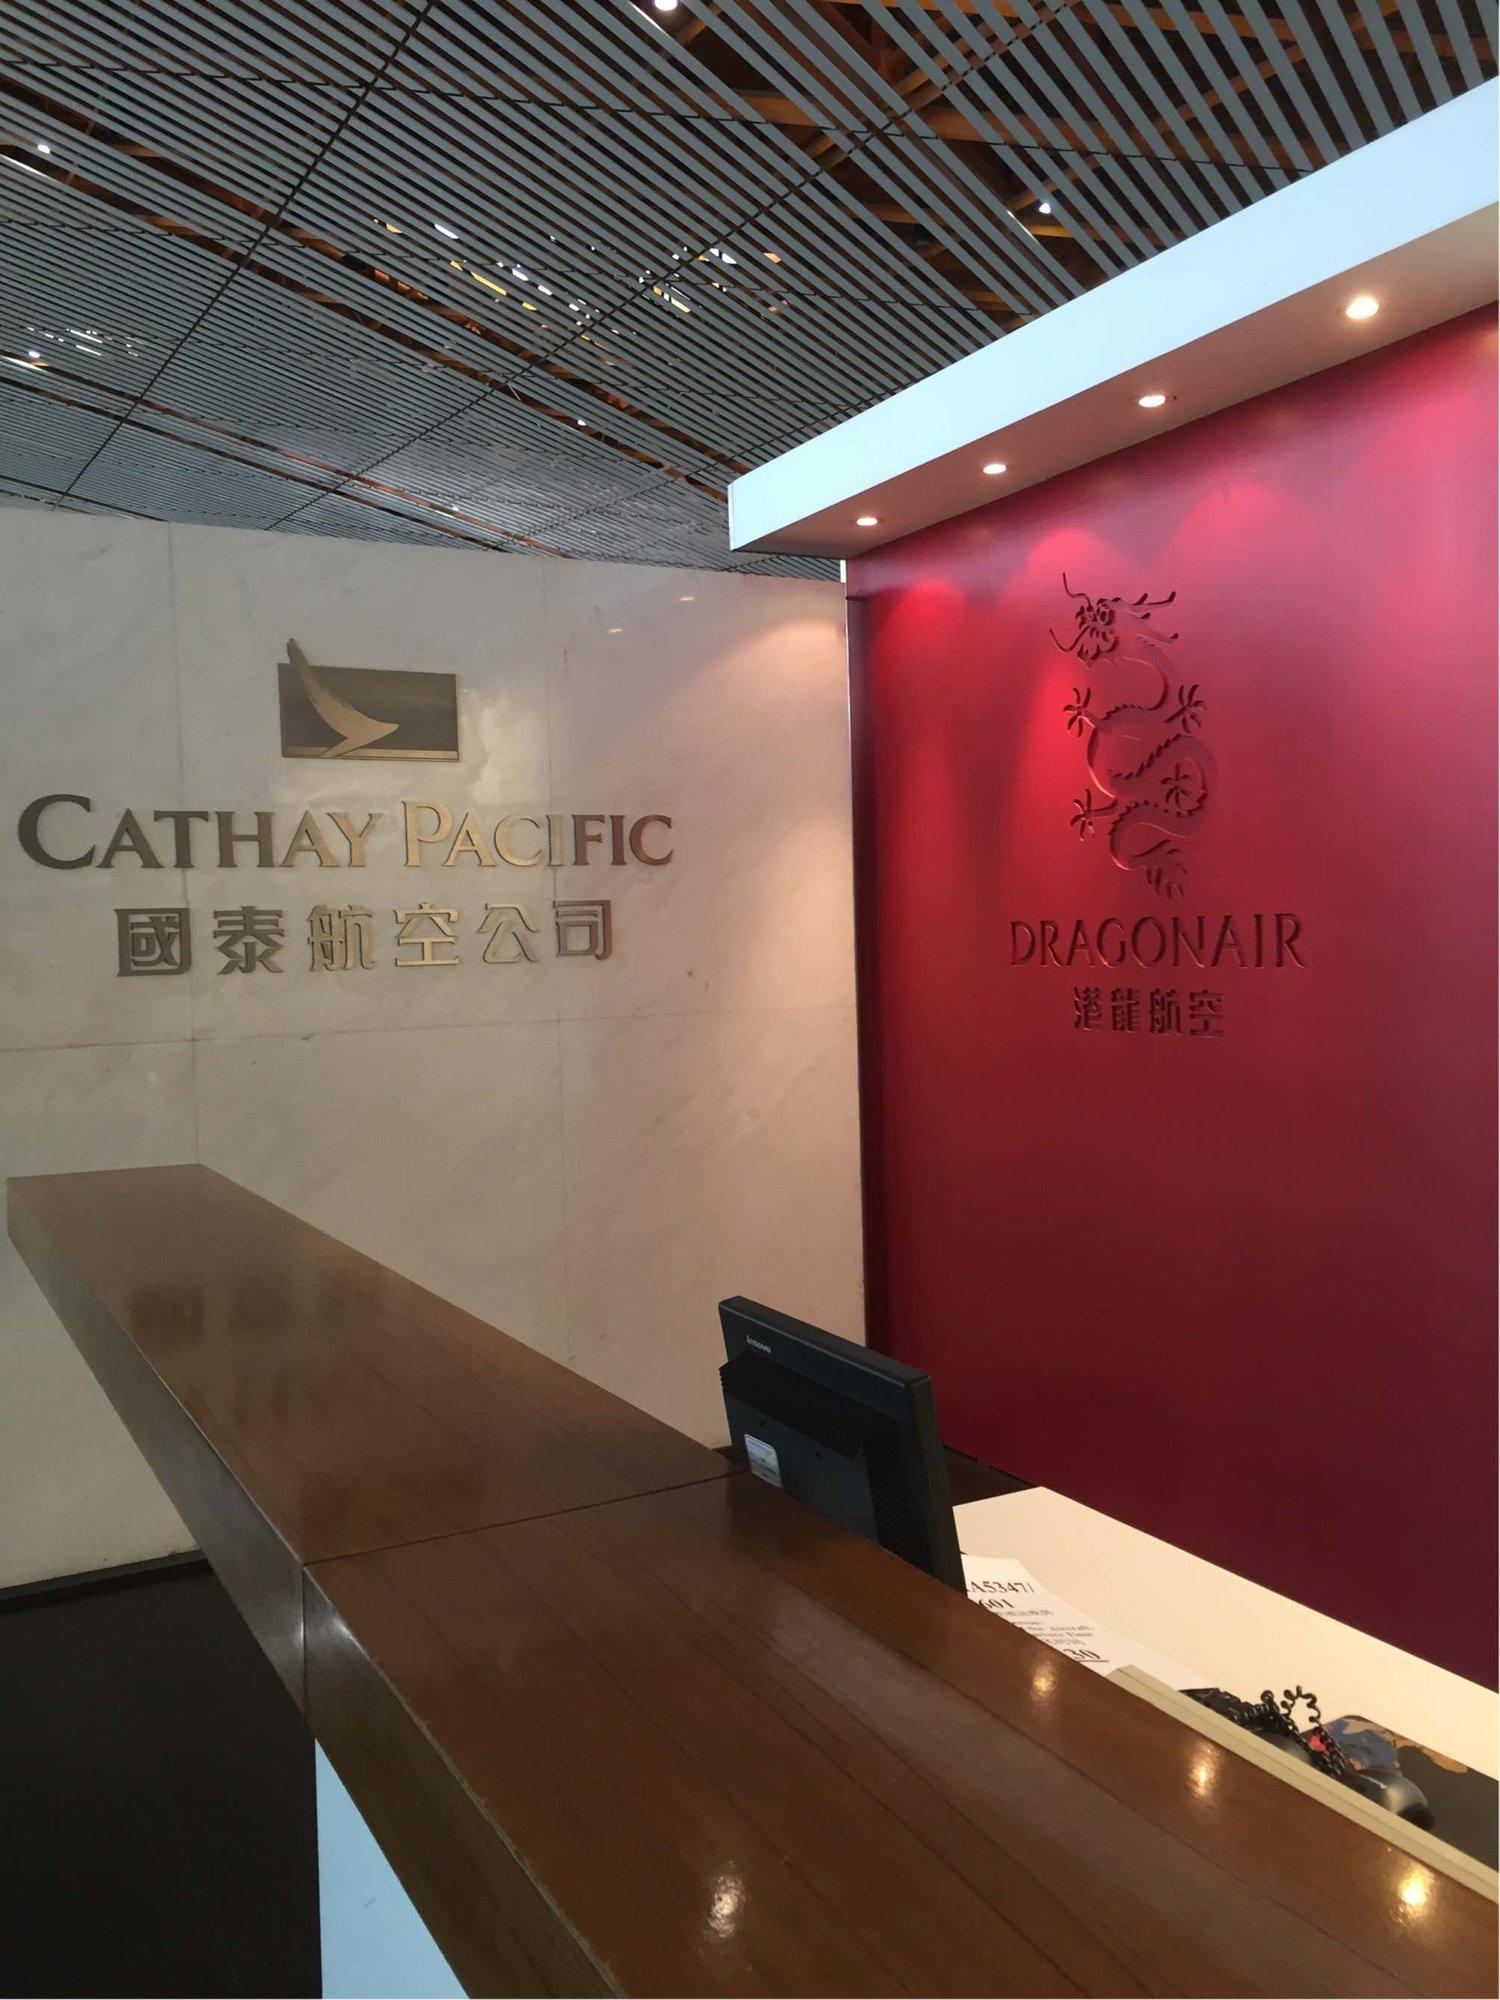 Cathay Pacific Lounge image 3 of 17